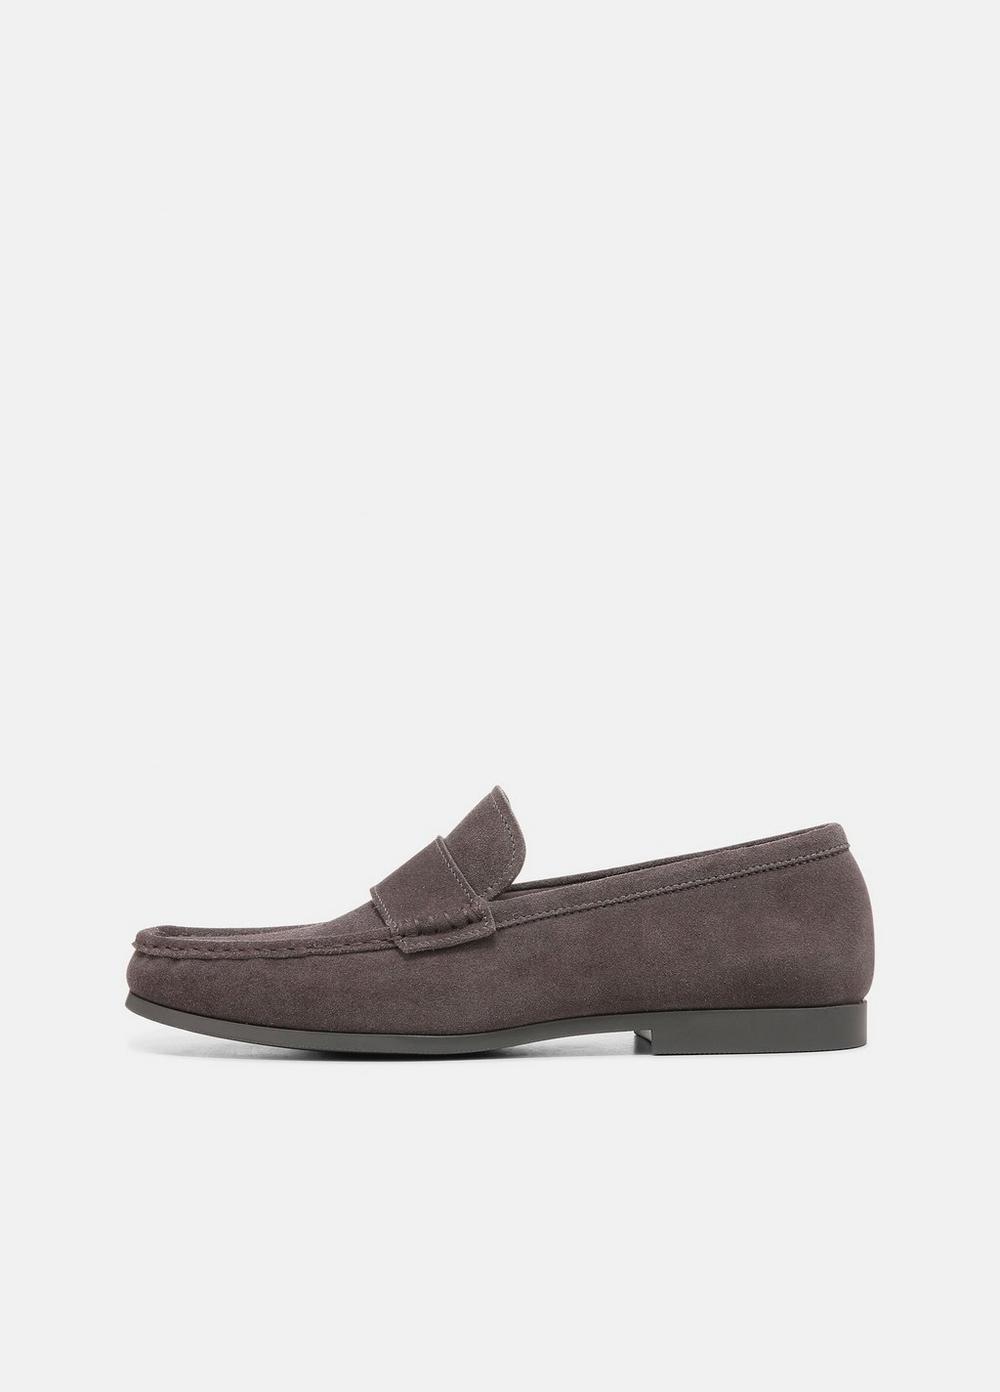 Vince Daly Suede Loafer in White | Lyst